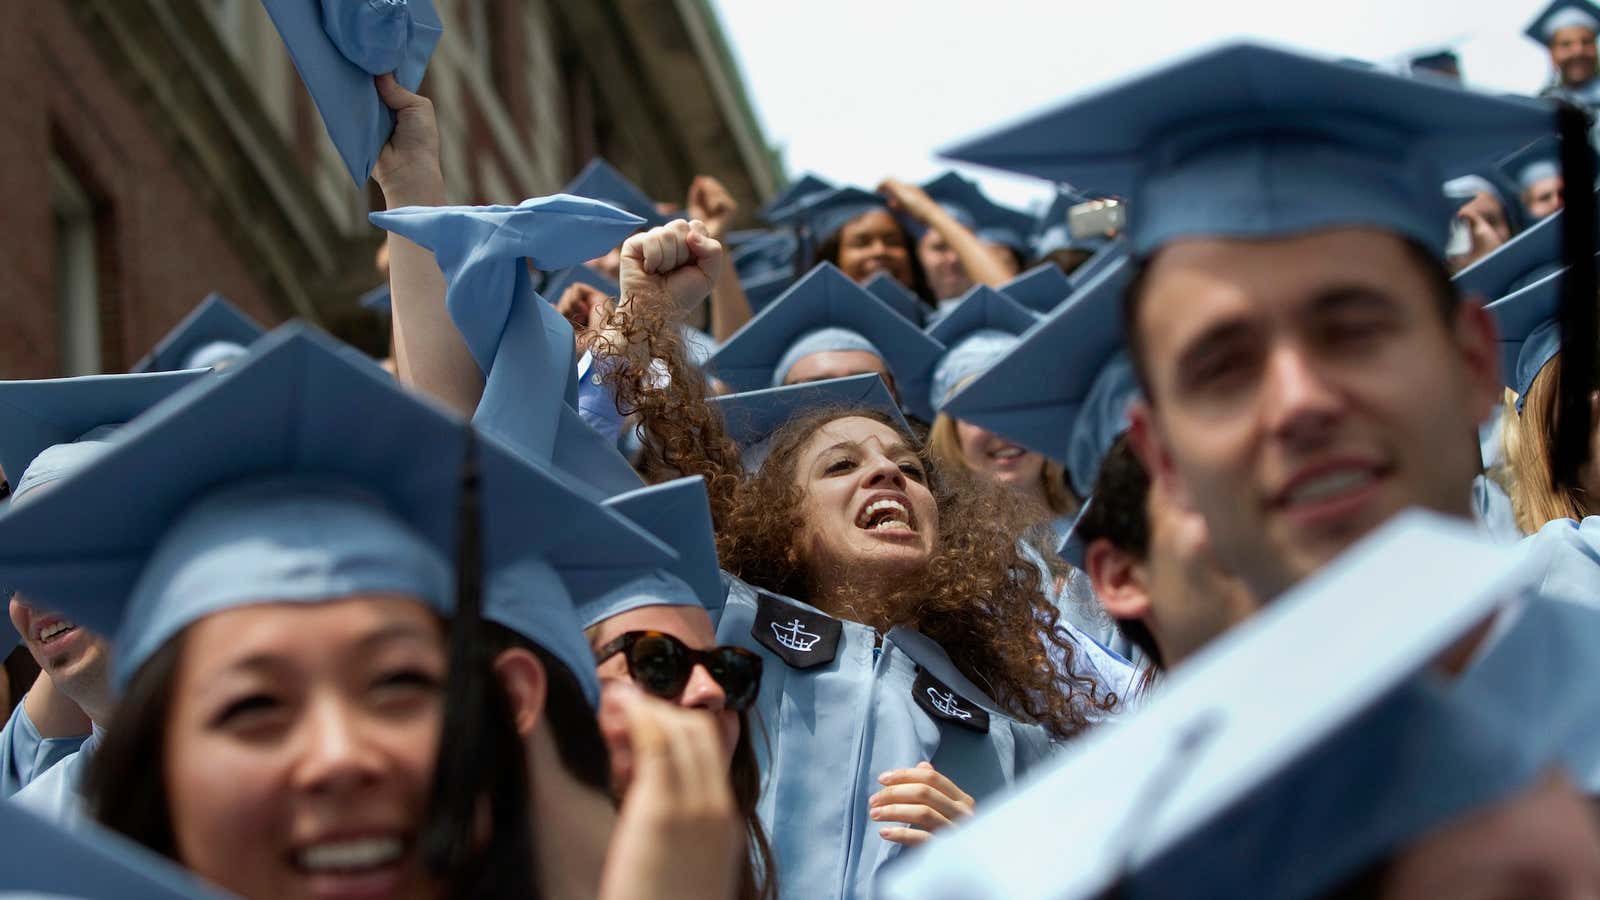 Before getting smarter at college, there’s getting smarter about college.